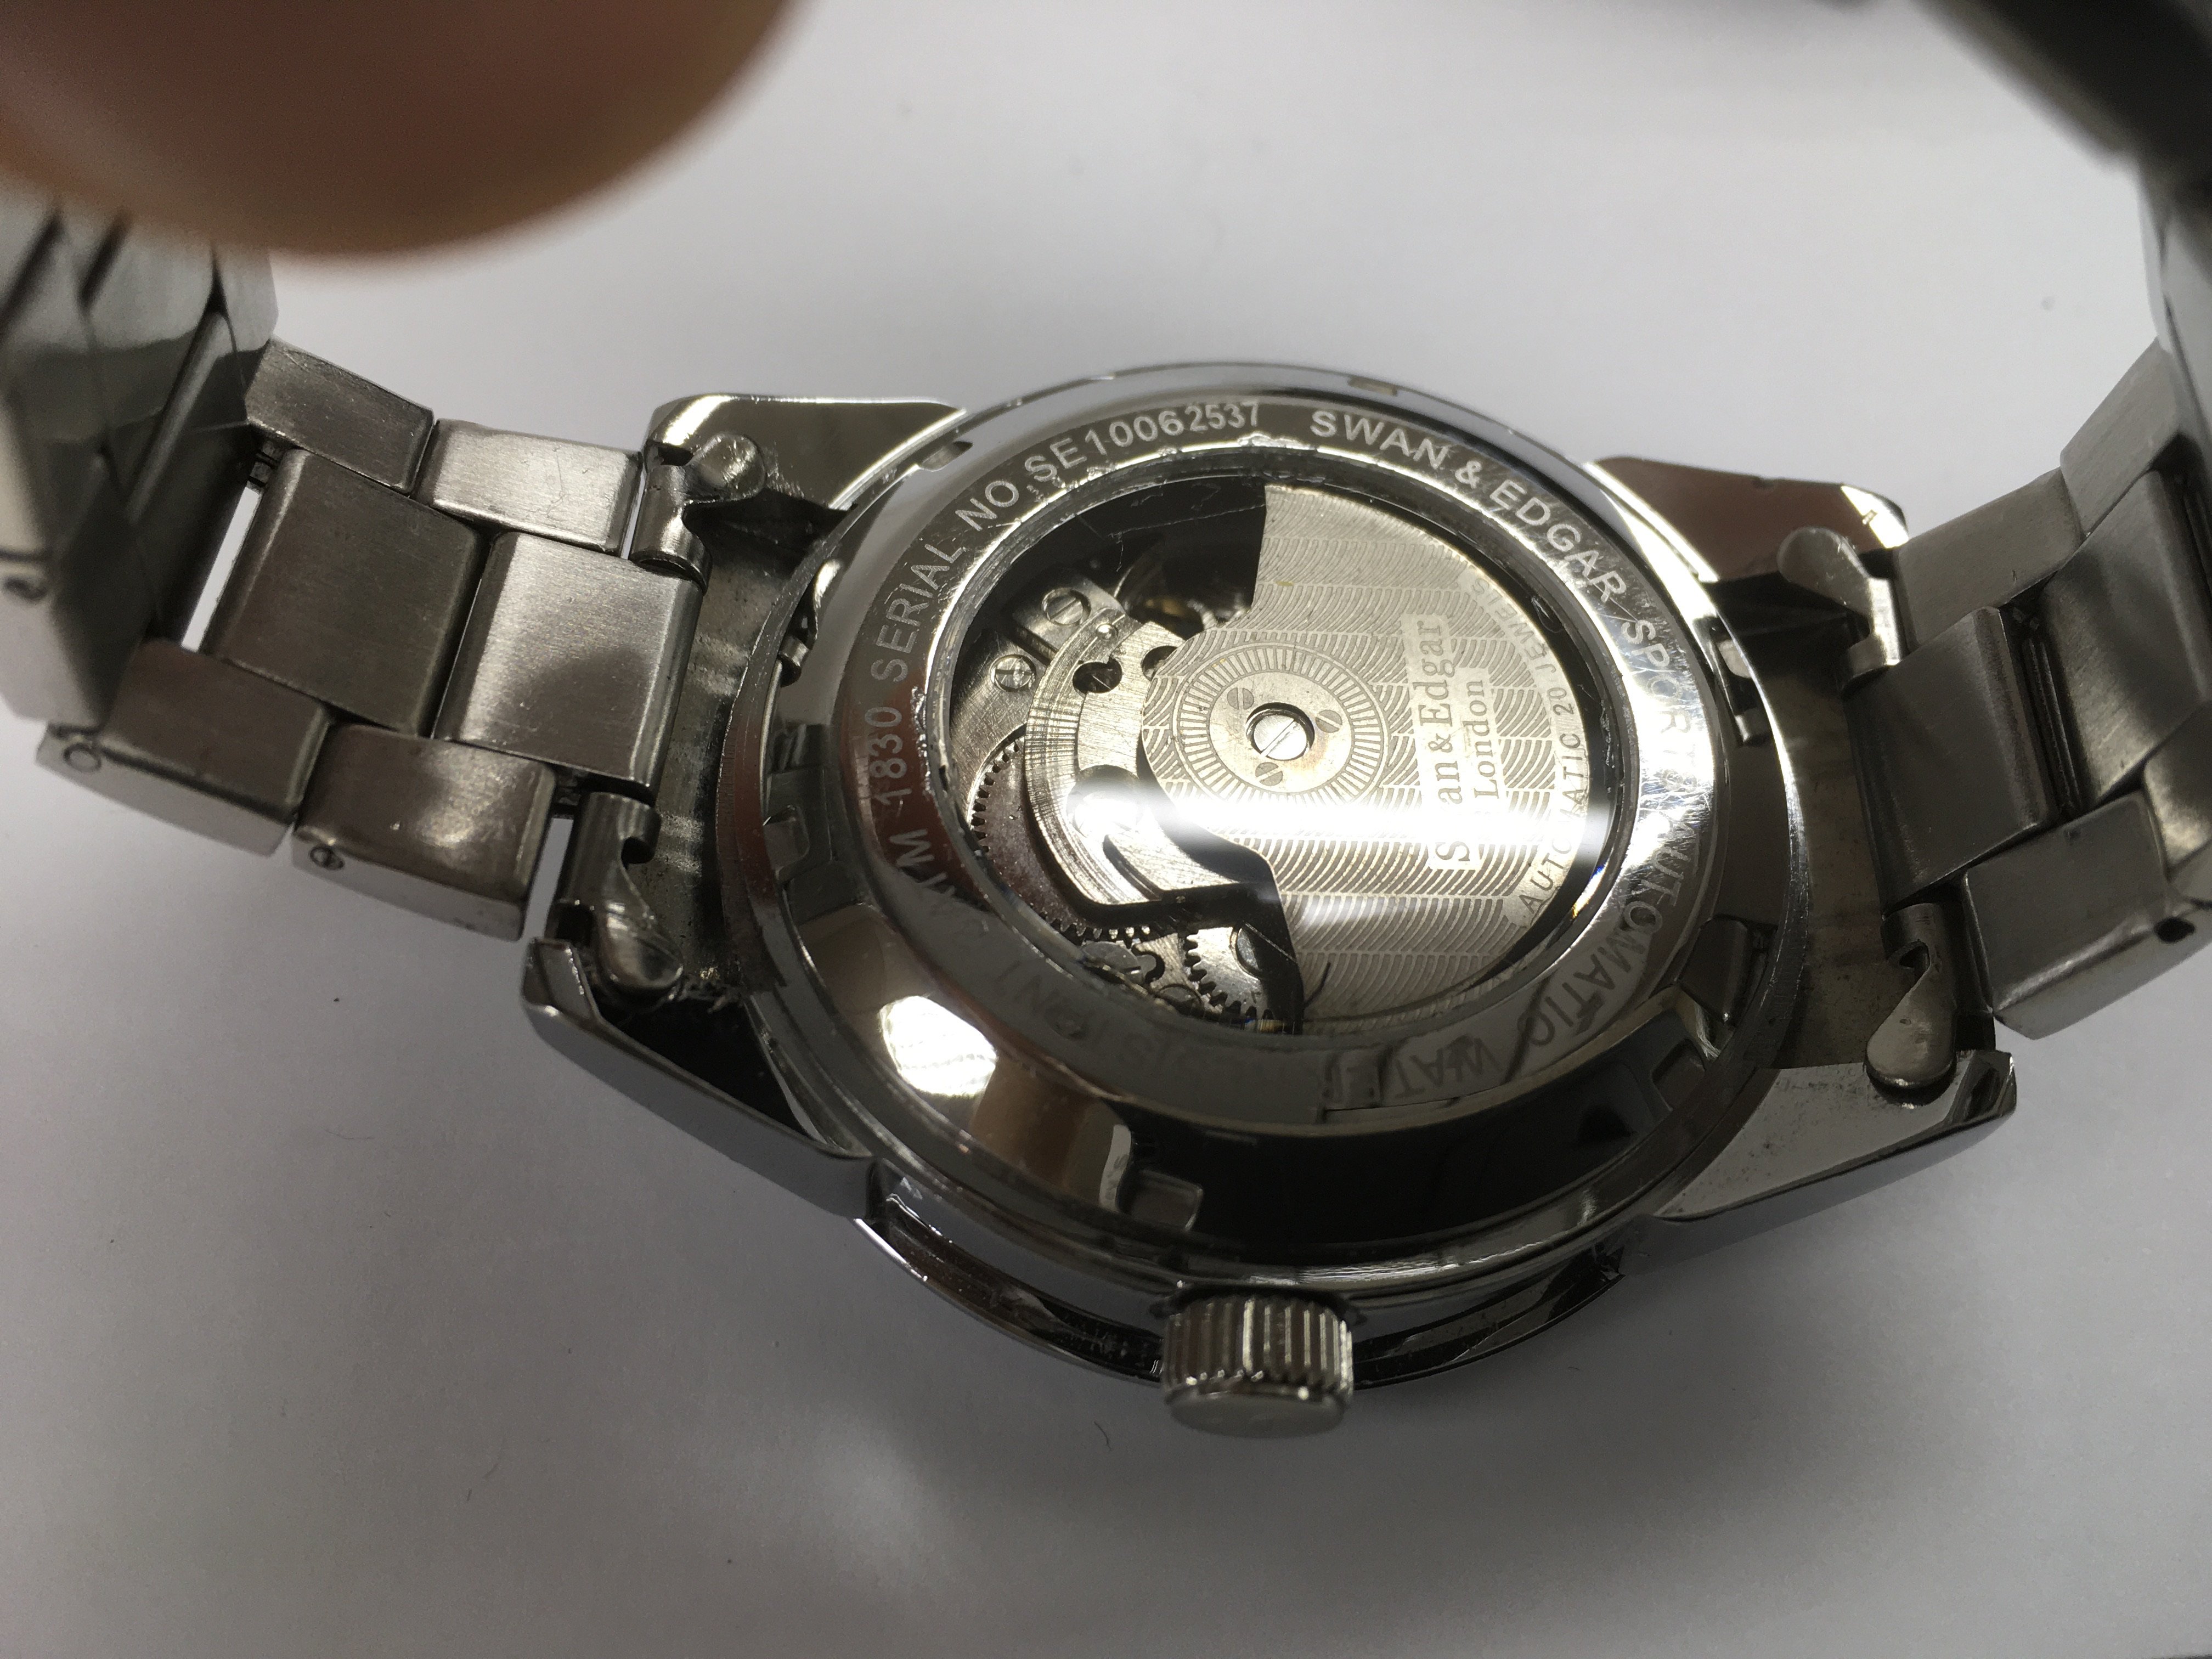 A Swan & Edgar automatic sports watch with moonpha - Image 2 of 2